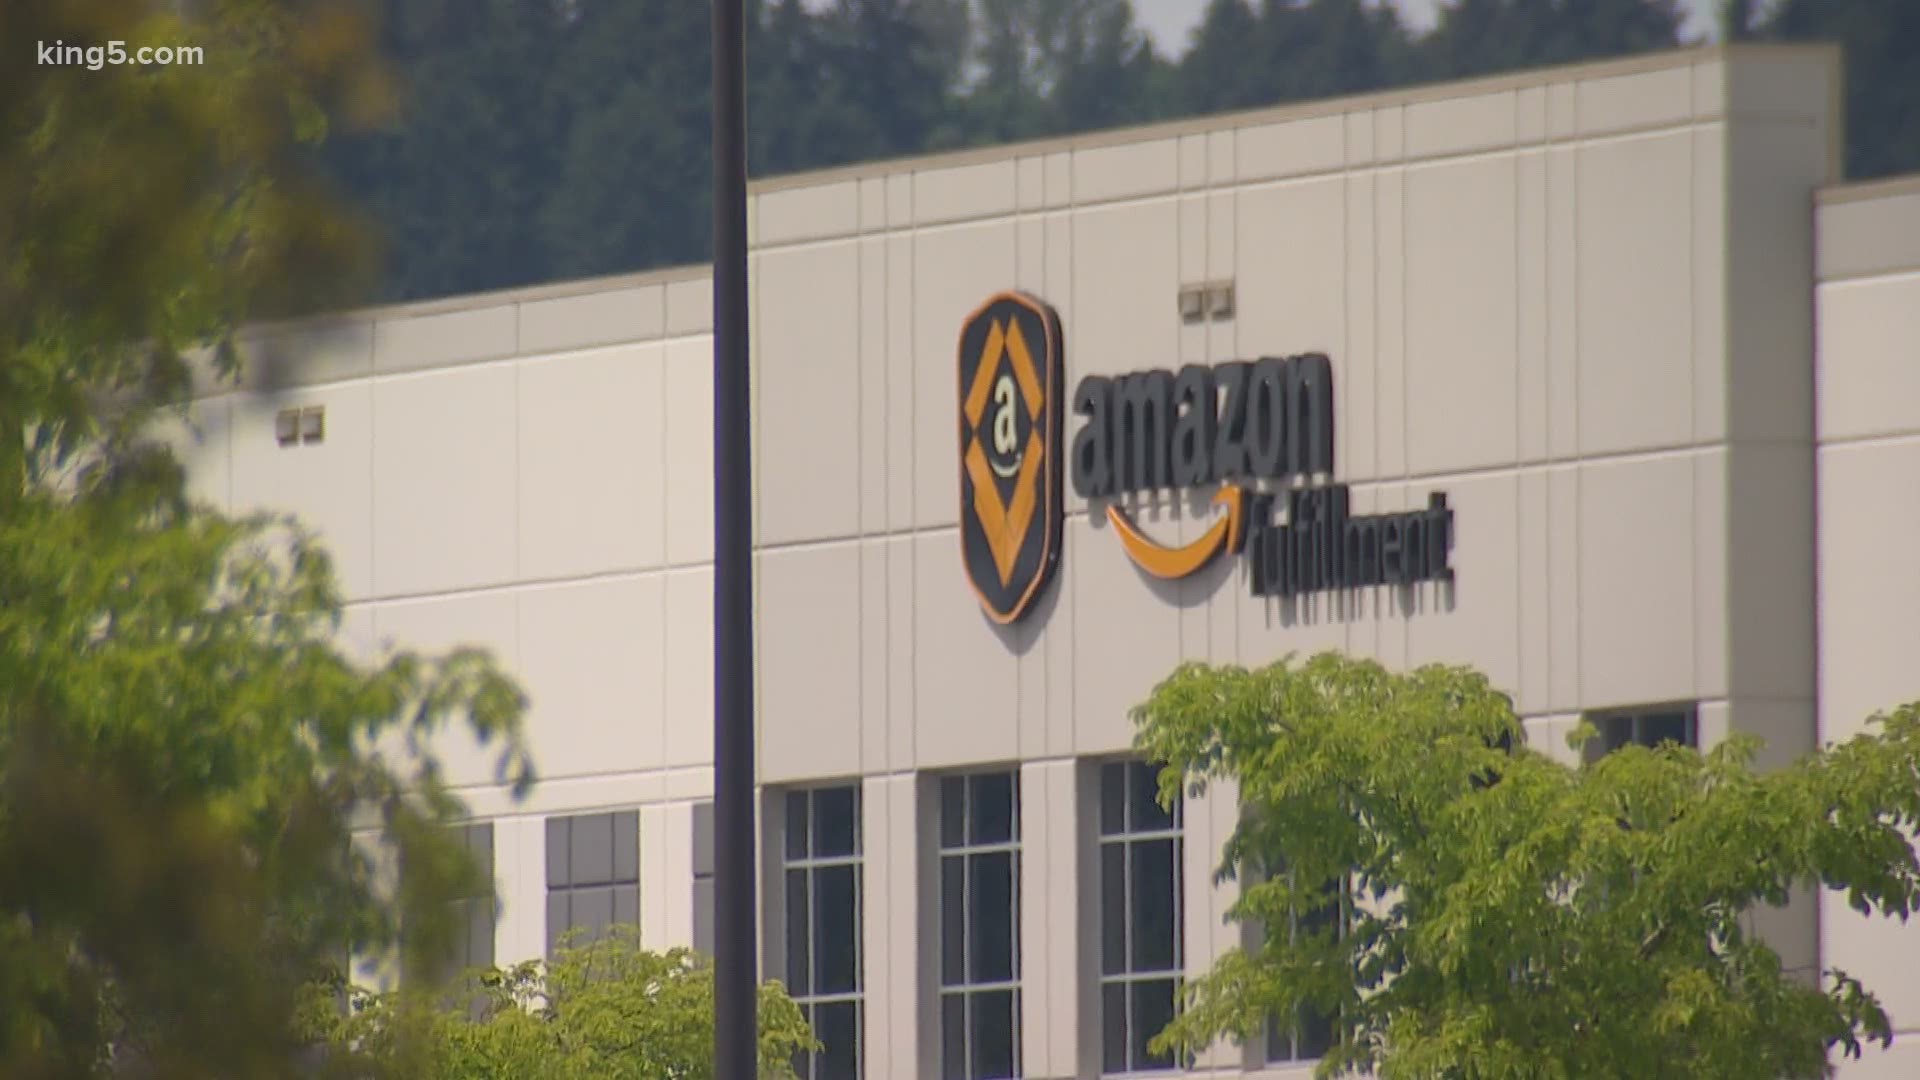 In audio released by Amazon, Jeff Bezos spoke to shareholders about several issues, including worker safety conditions and criticism from employees.